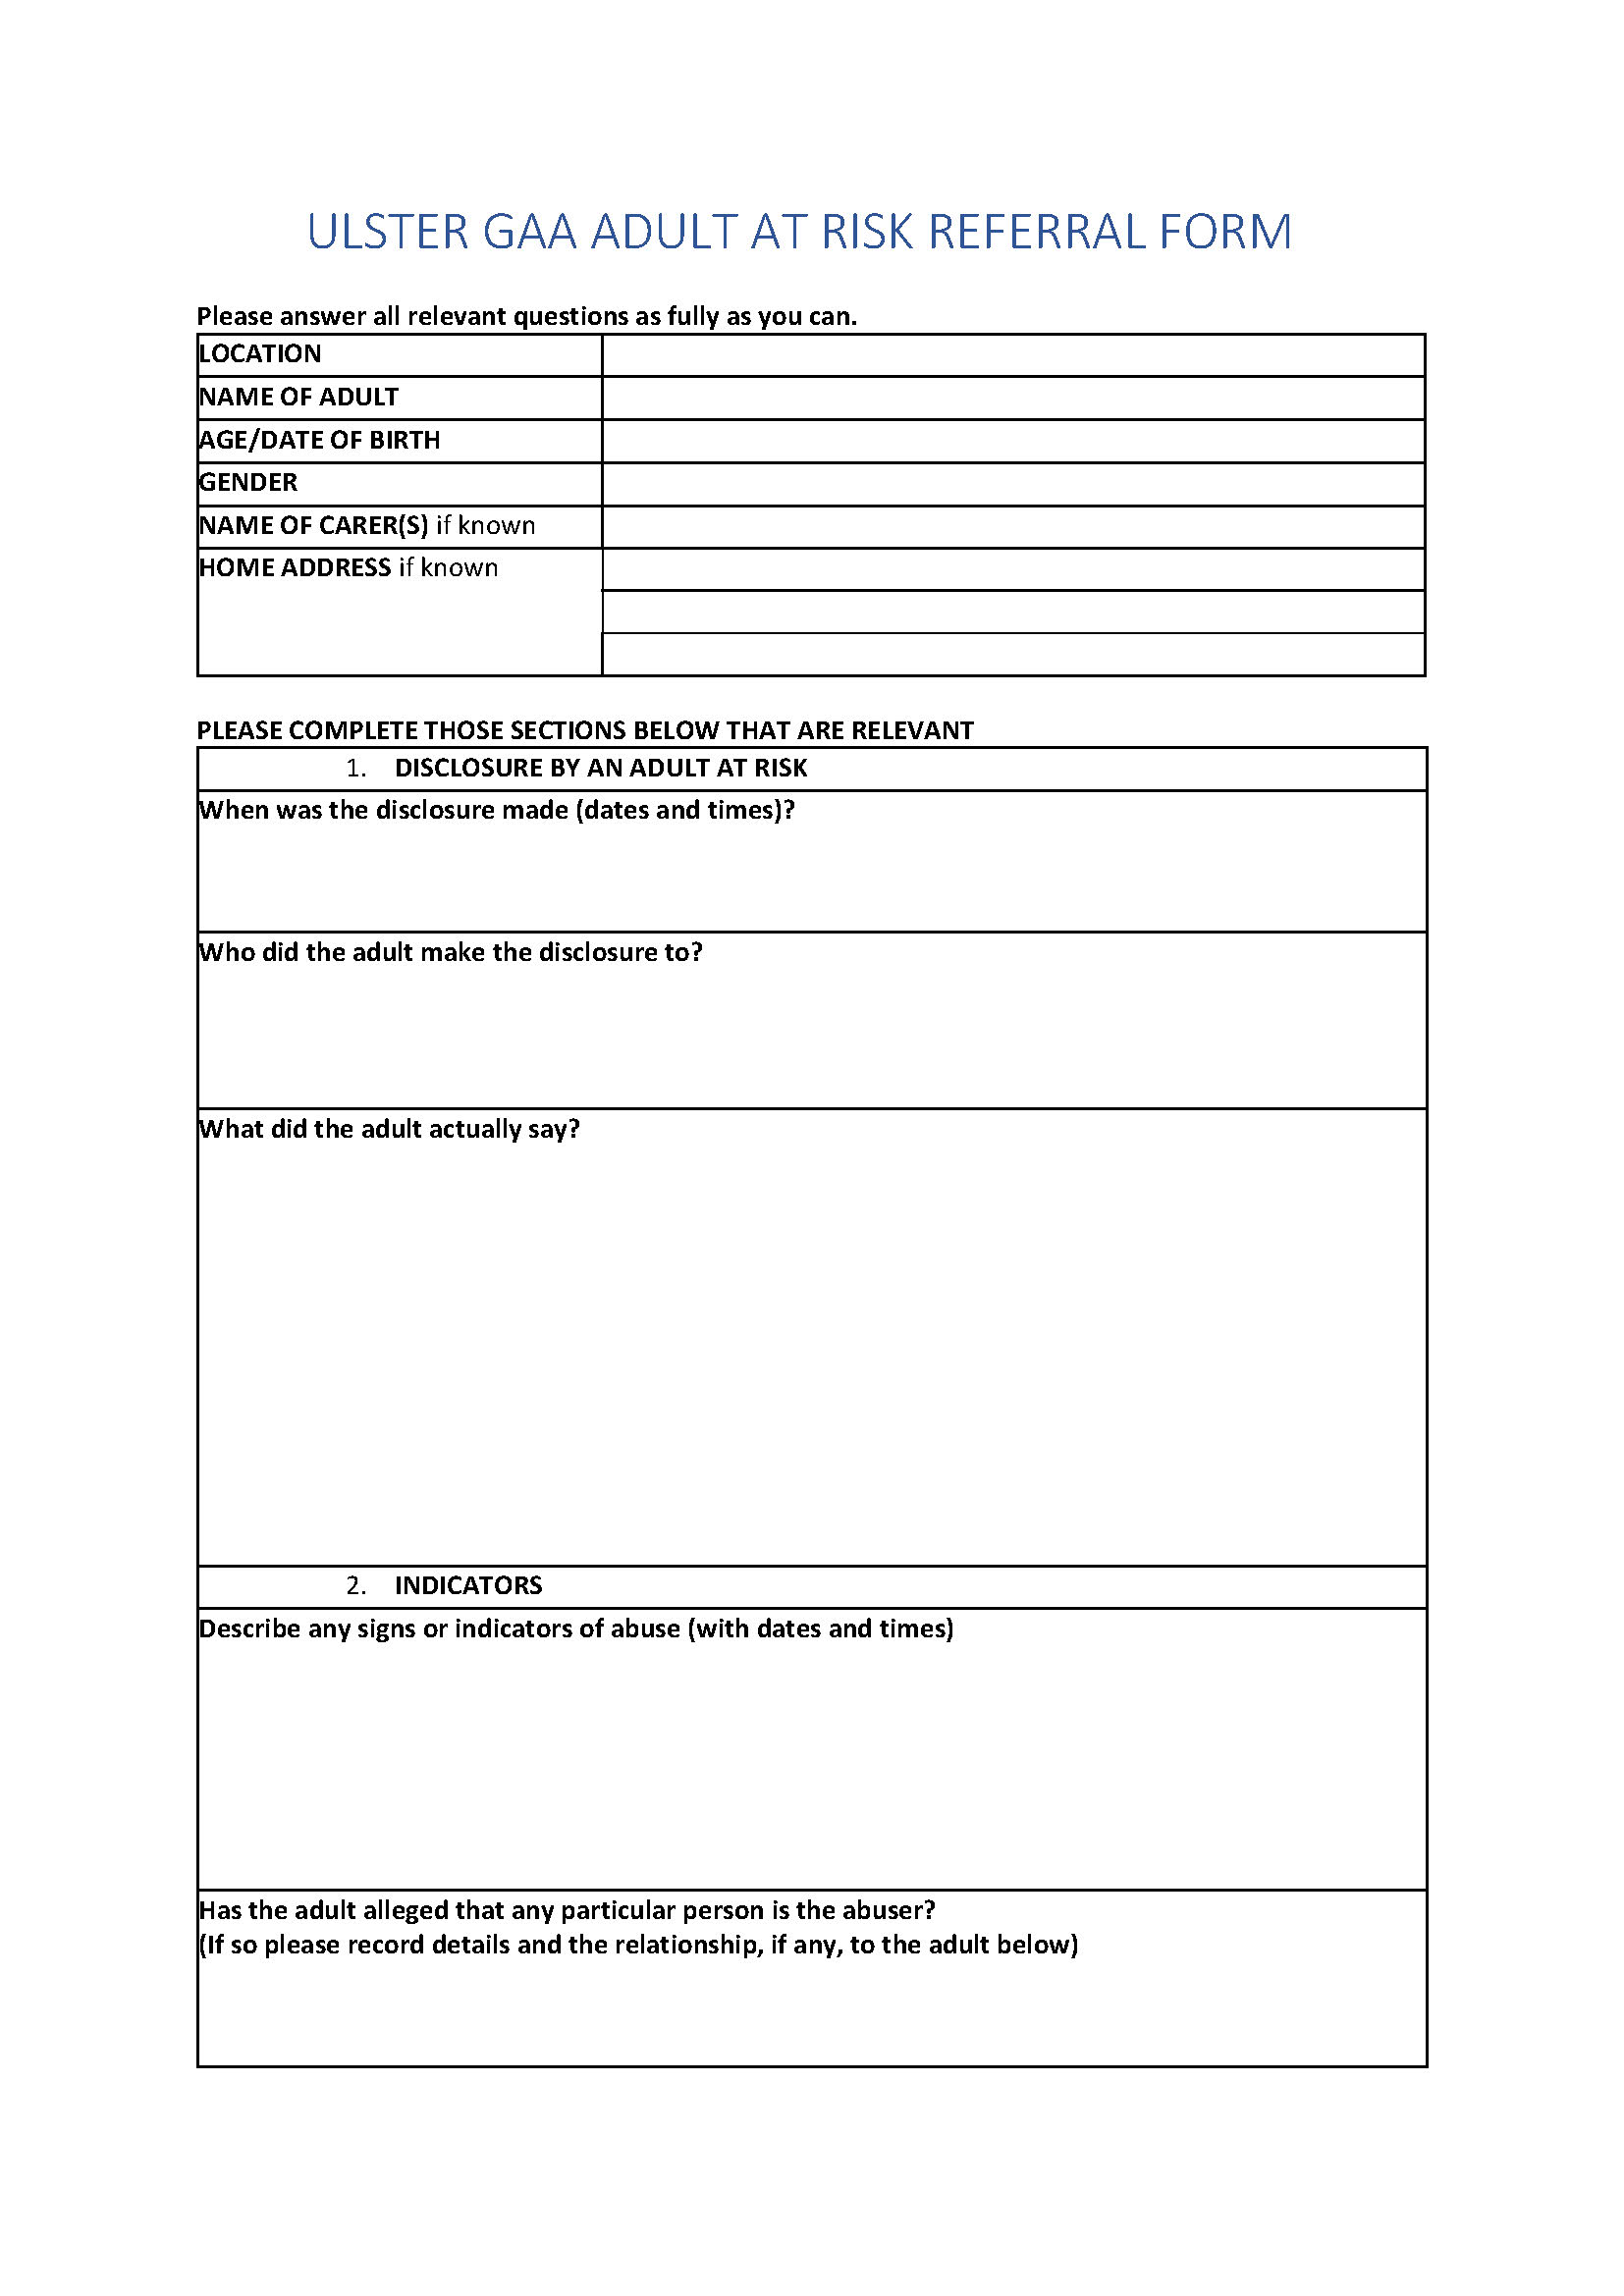 Ulster GAA Adult at Risk Referral Form 2023